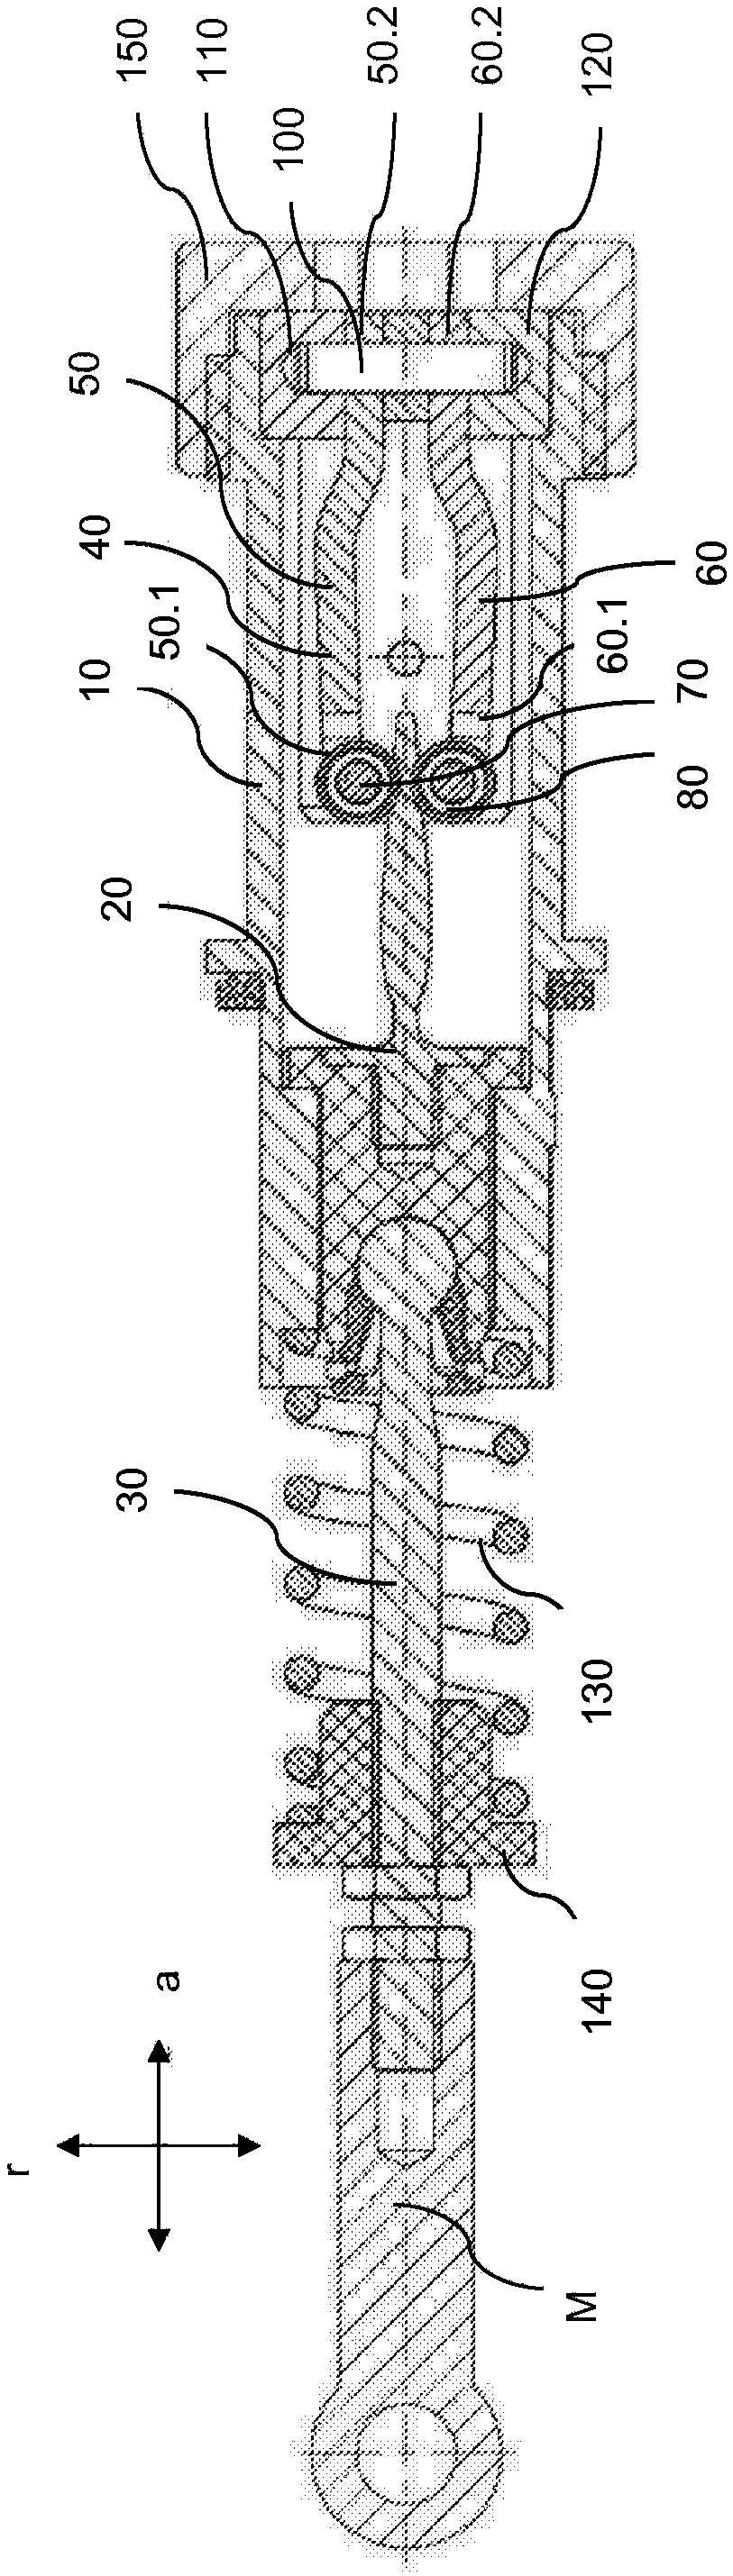 Device for simulating a force on an actuation element of a vehicle, in particular a pedal force simulator